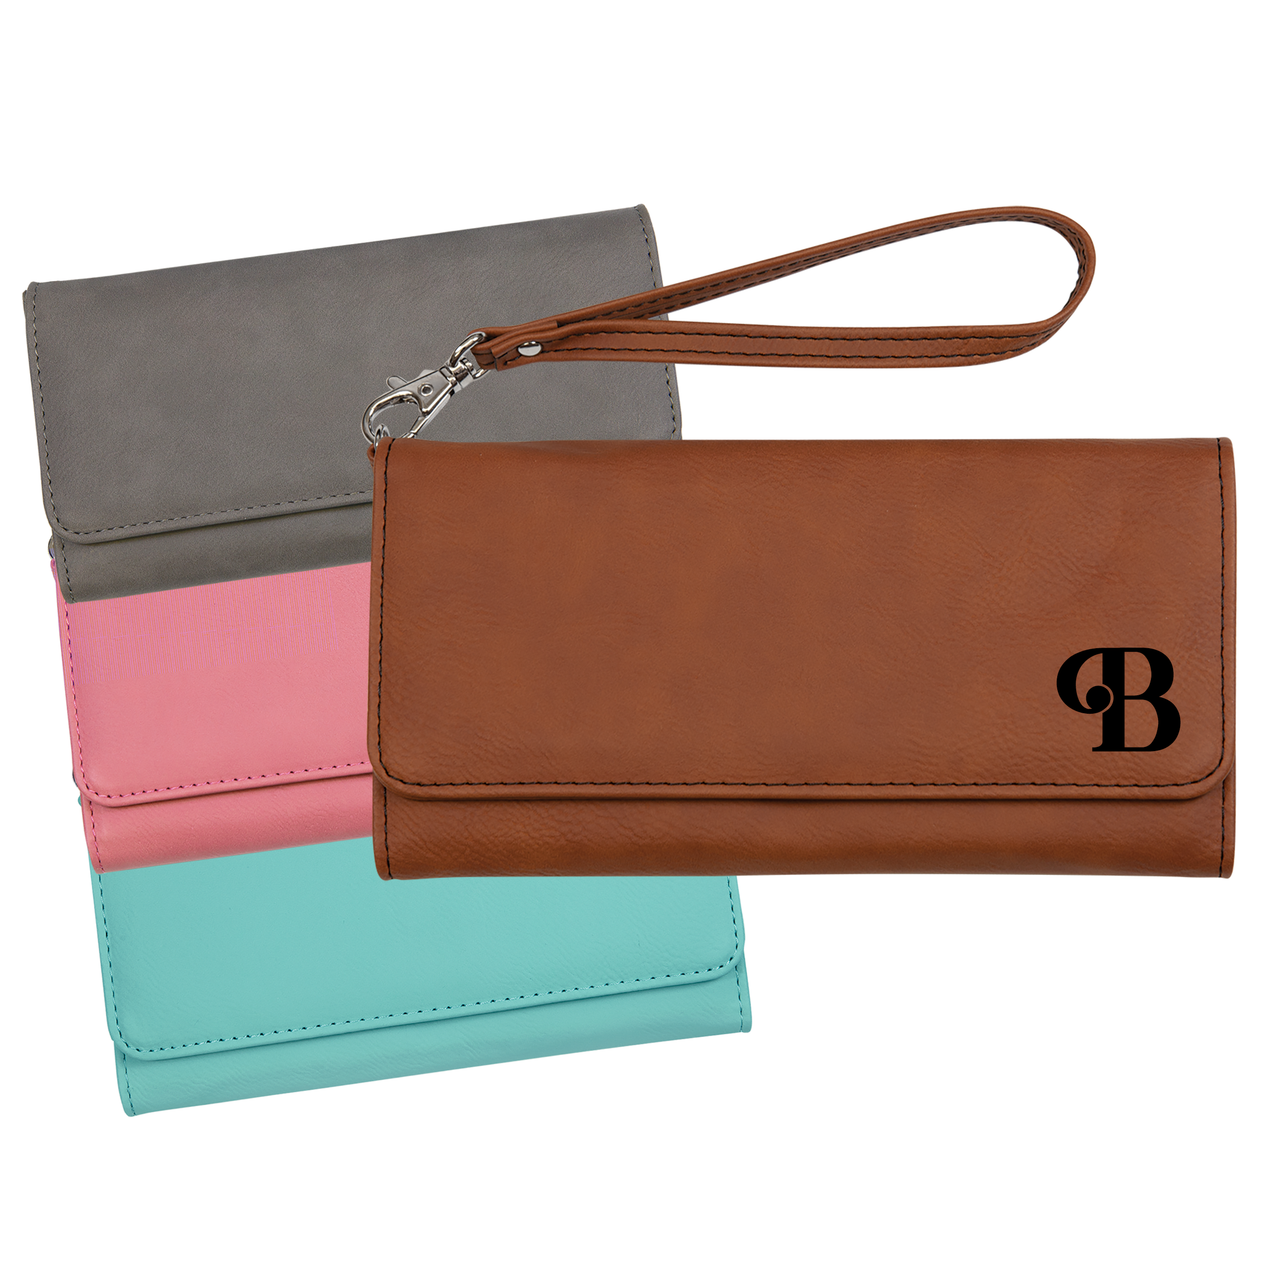 Personalized Monogram Wallet With Strap Faux Leather Large Women's Wallet Baum Designs